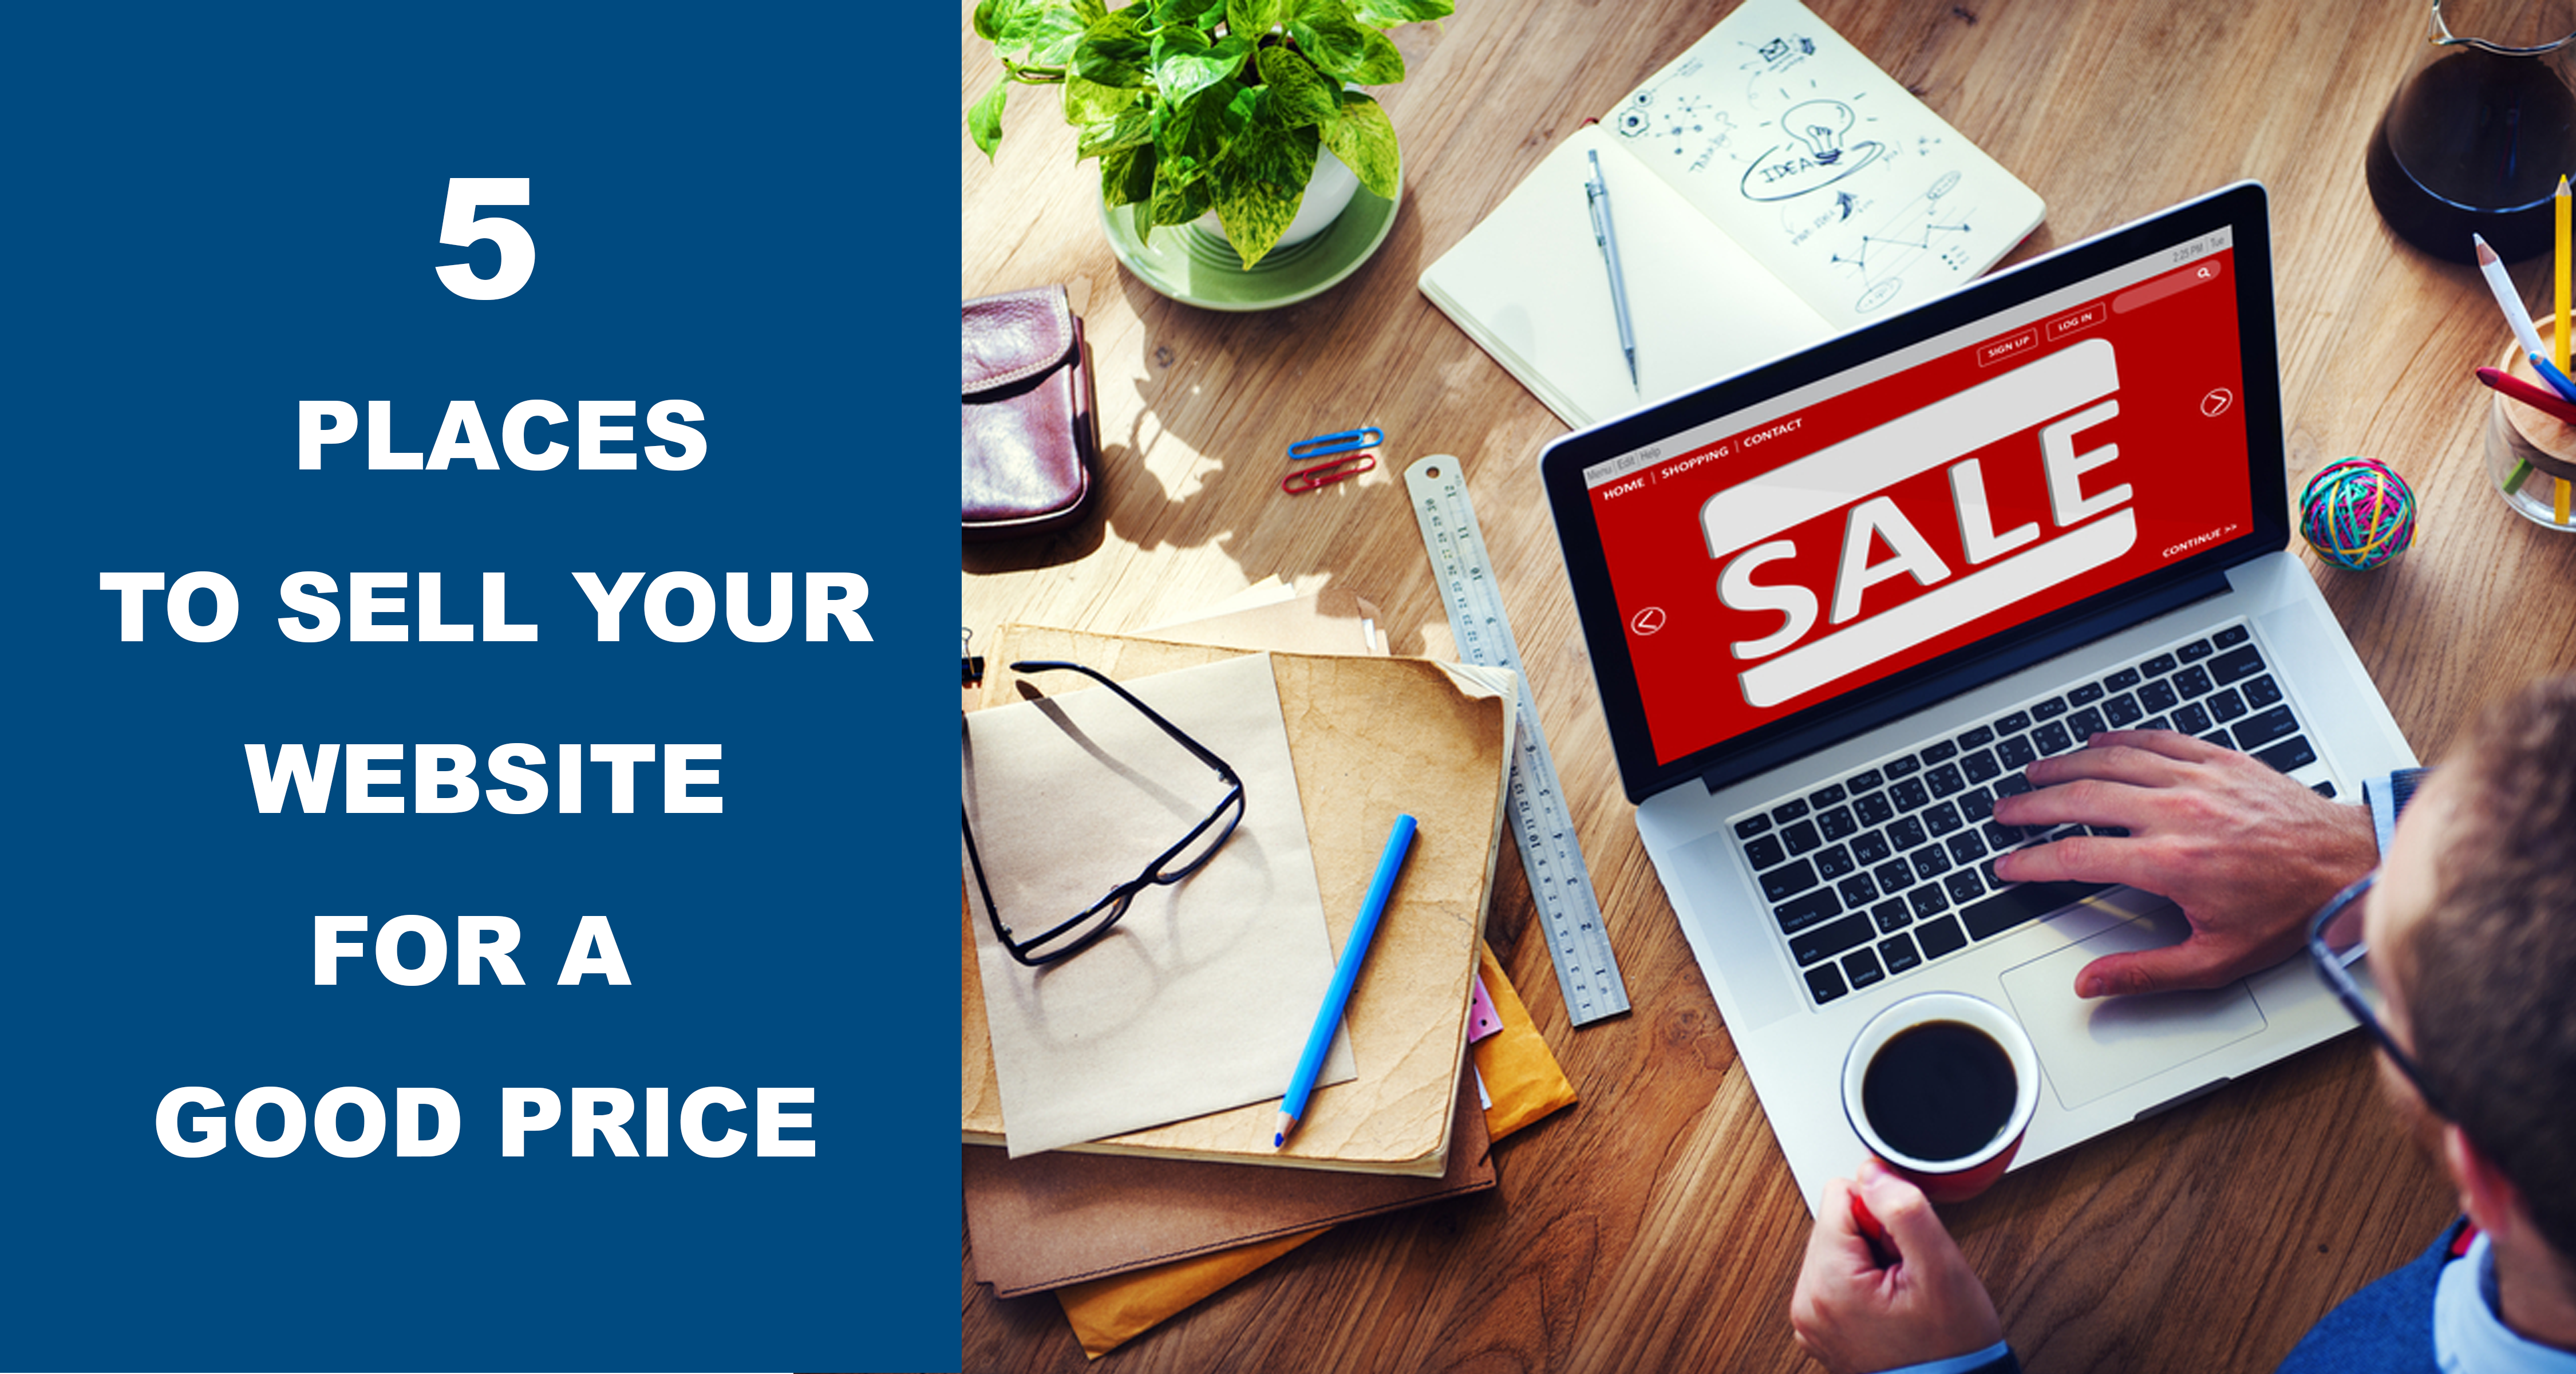 5 Places To Sell Your Website For A Good Price